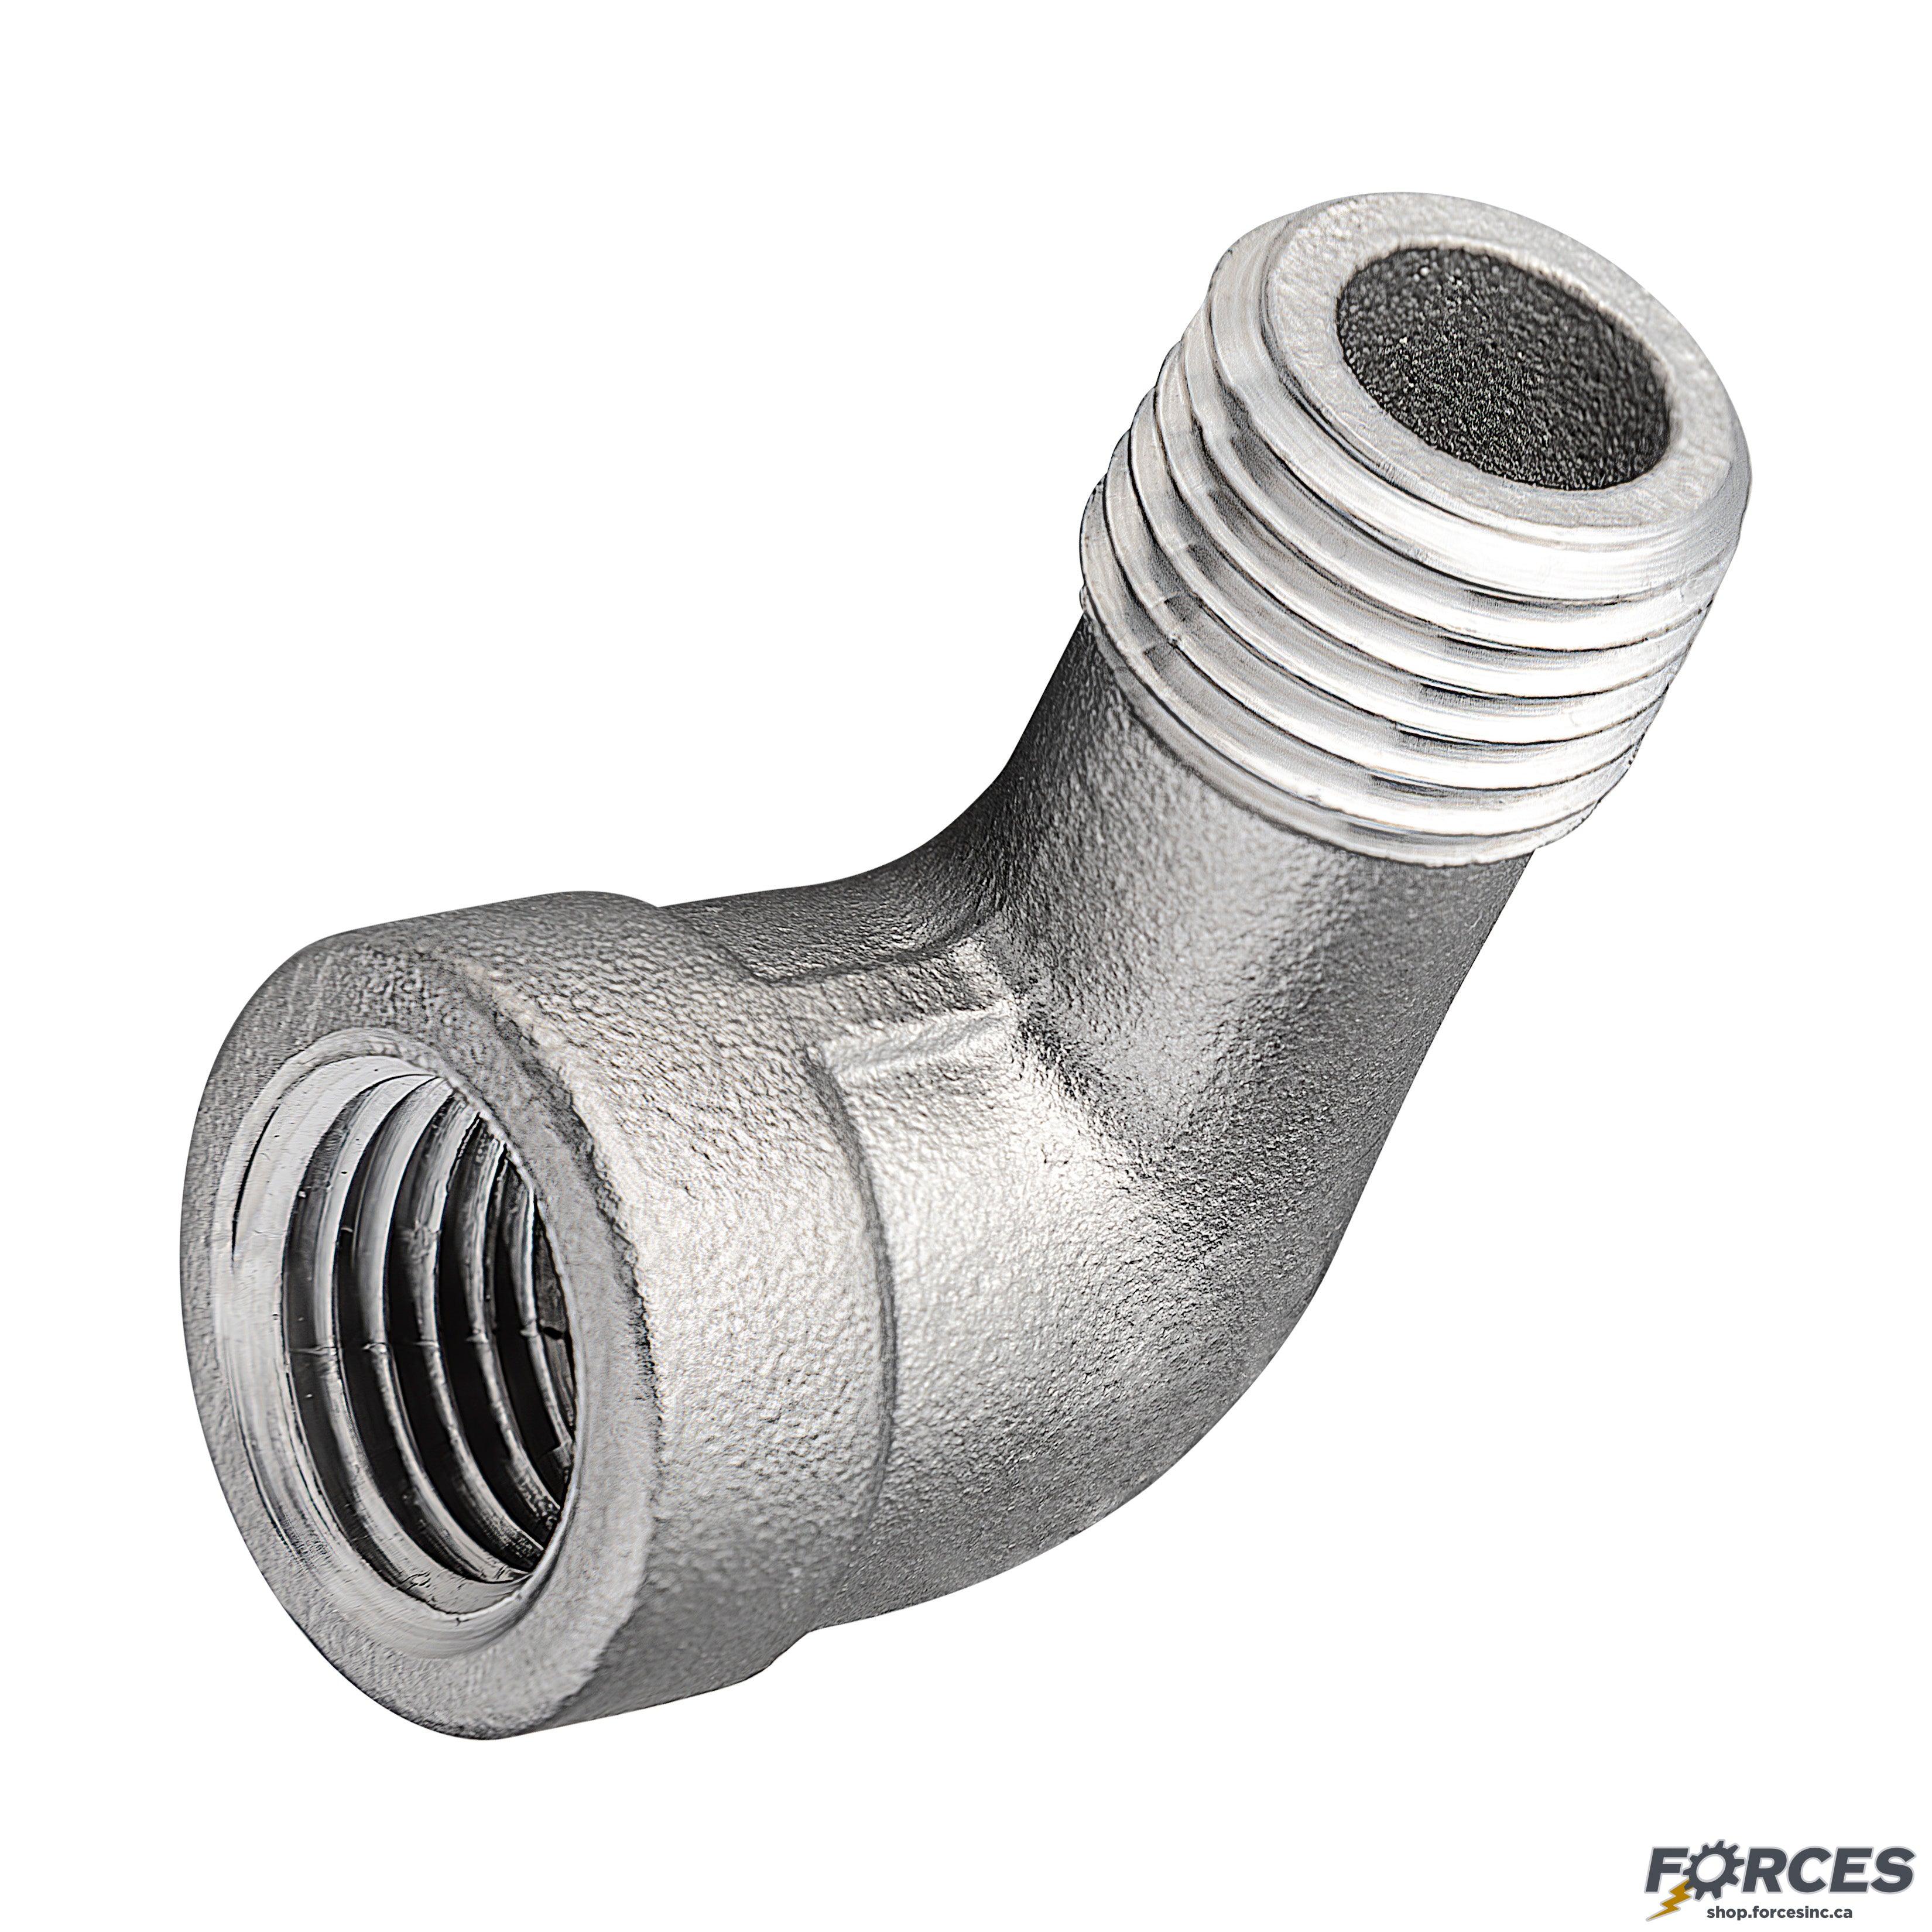 1/4" Street Elbow 90° NPT #150 - Stainless Steel 316 - Forces Inc